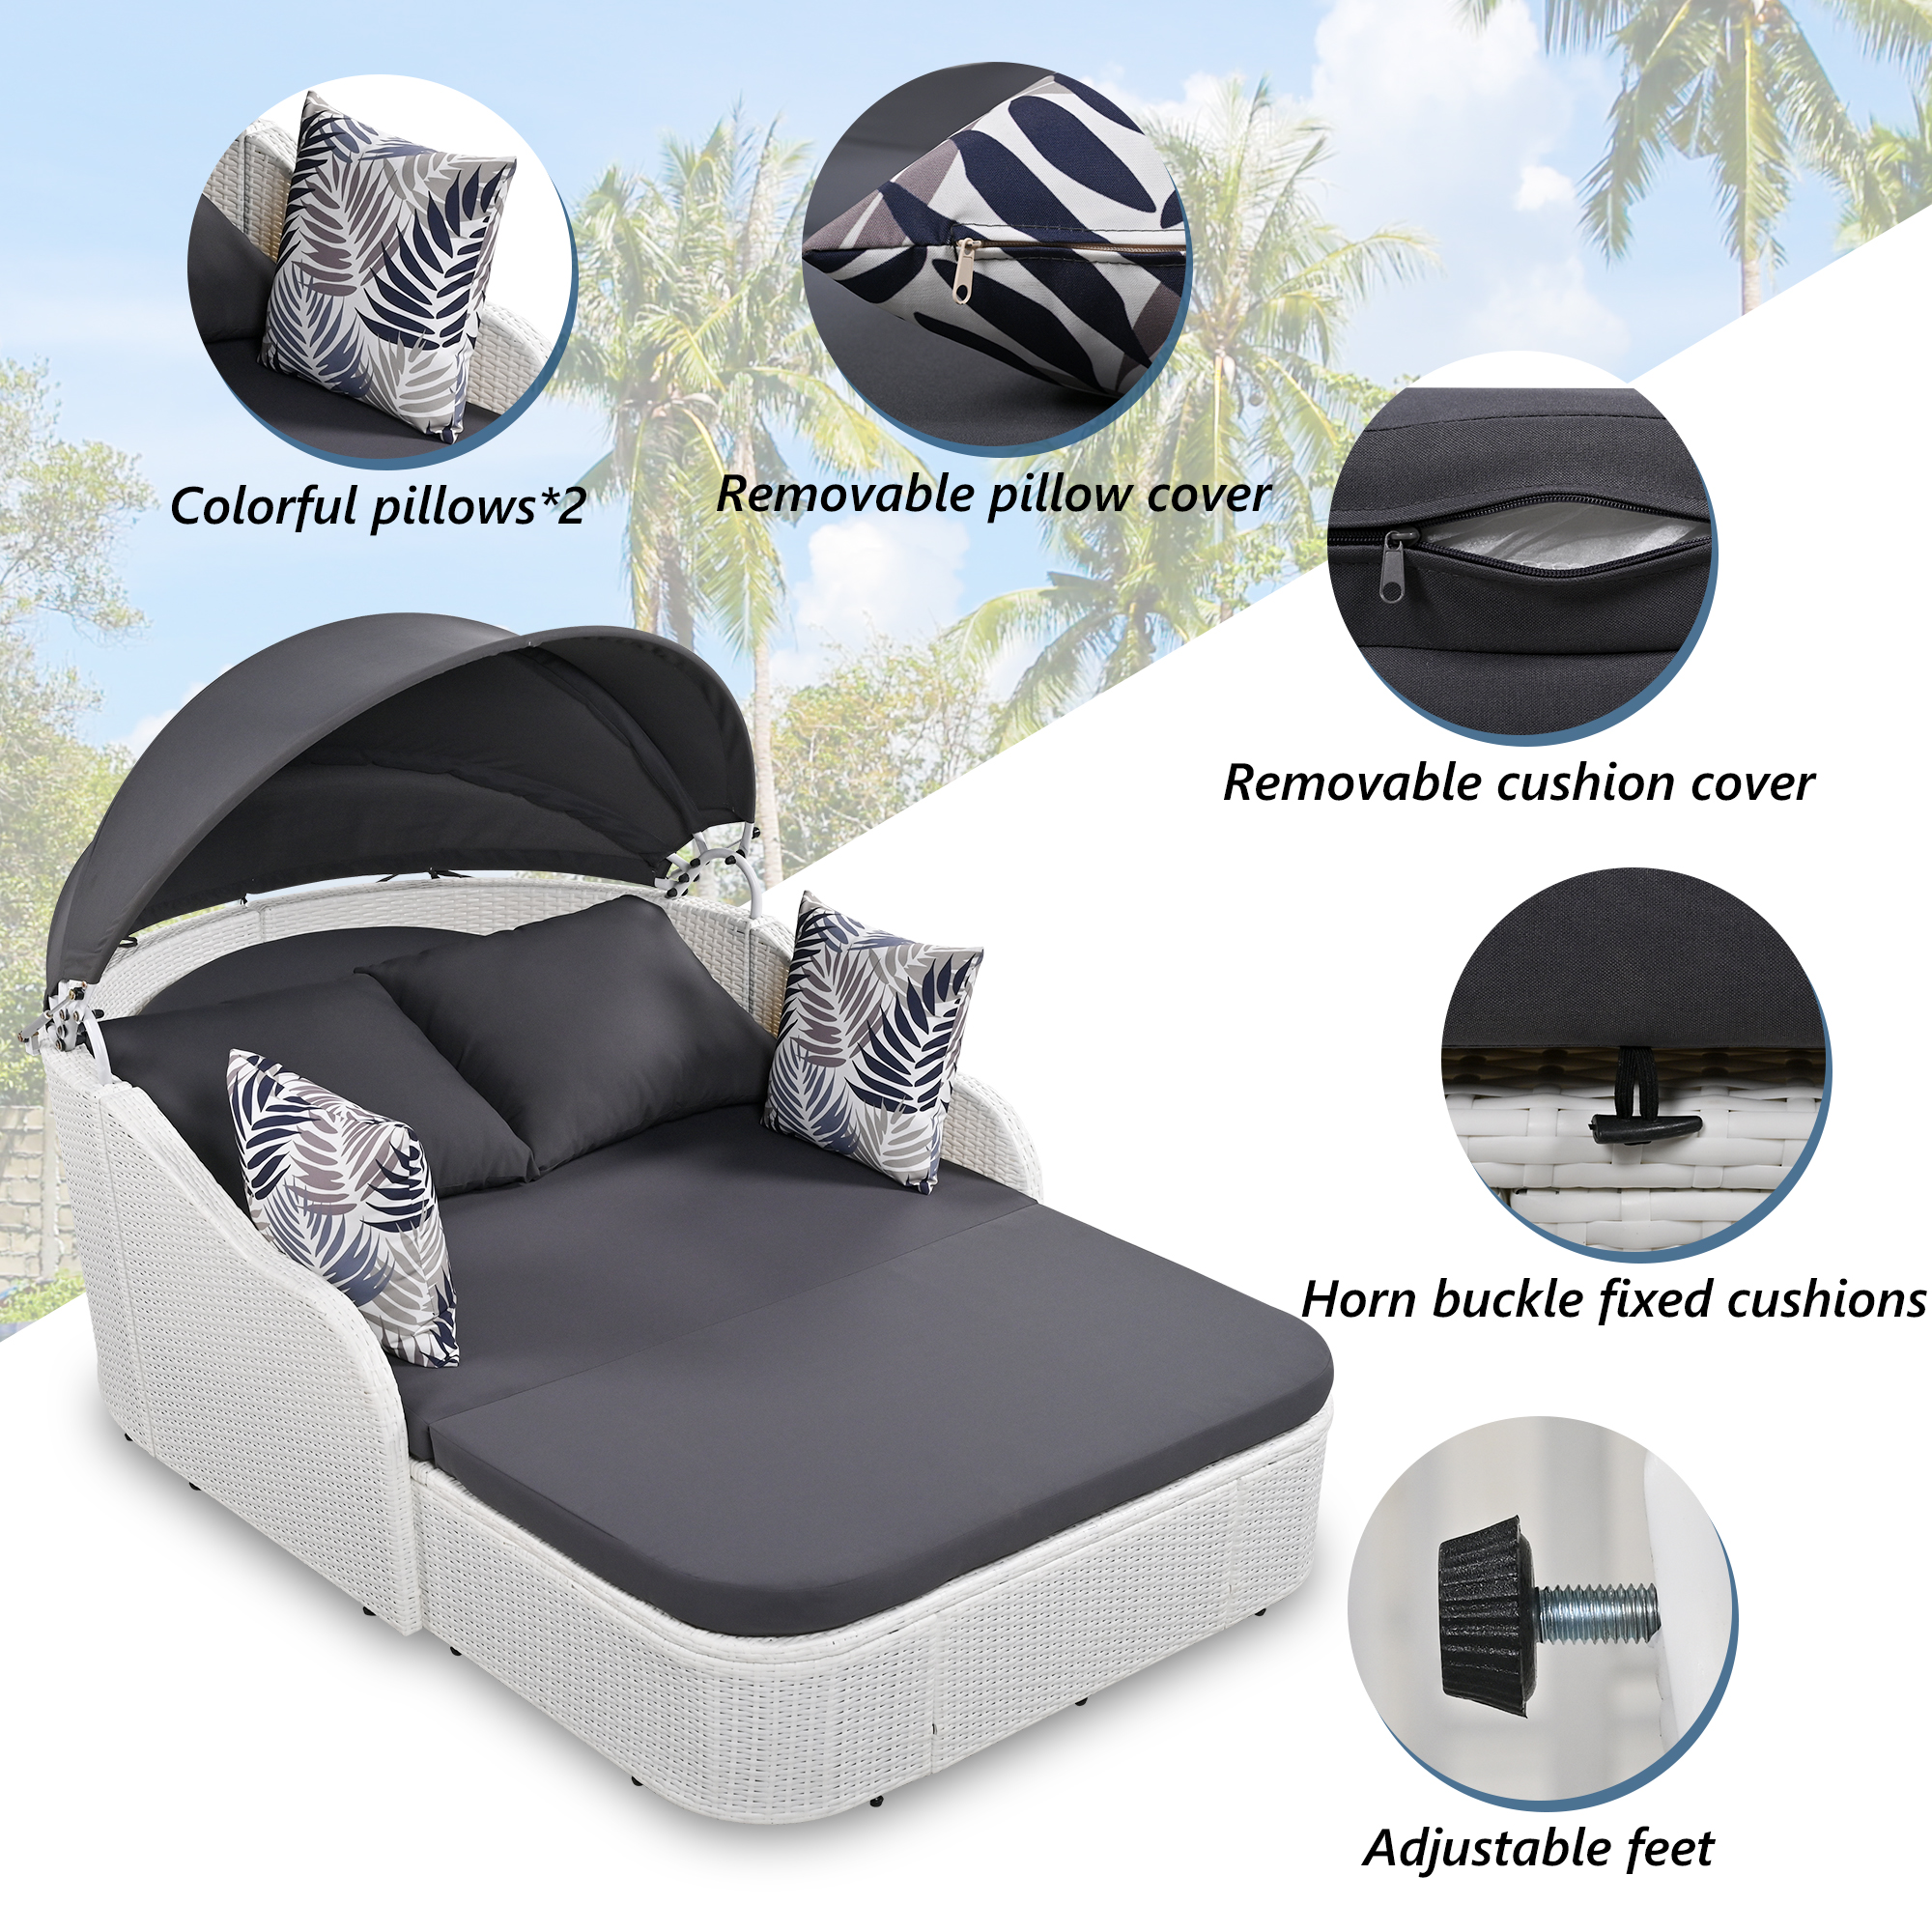 Seizeen Outdoor Rattan Chaise Lounge, 2-Person Reclining Daybed with Adjustable Canopy and Gray Cushions, Multifunction PE Wicker Furniture w/ Cover, White - image 5 of 13